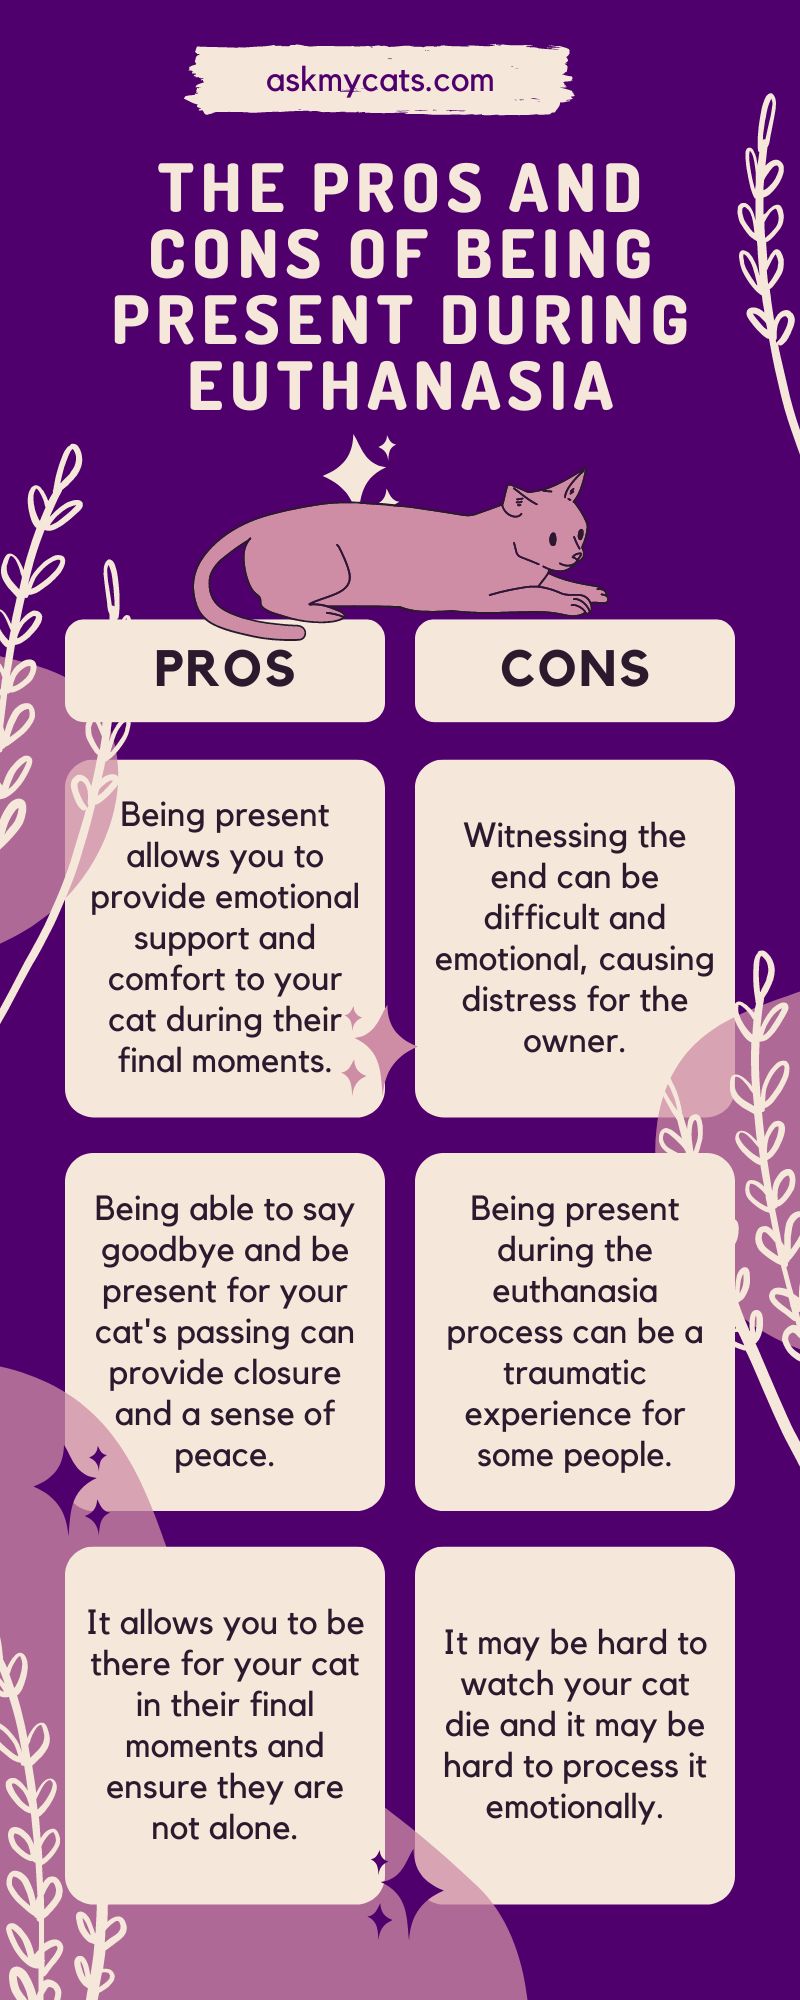 The Pros and Cons of Being Present During Euthanasia (Infographic)